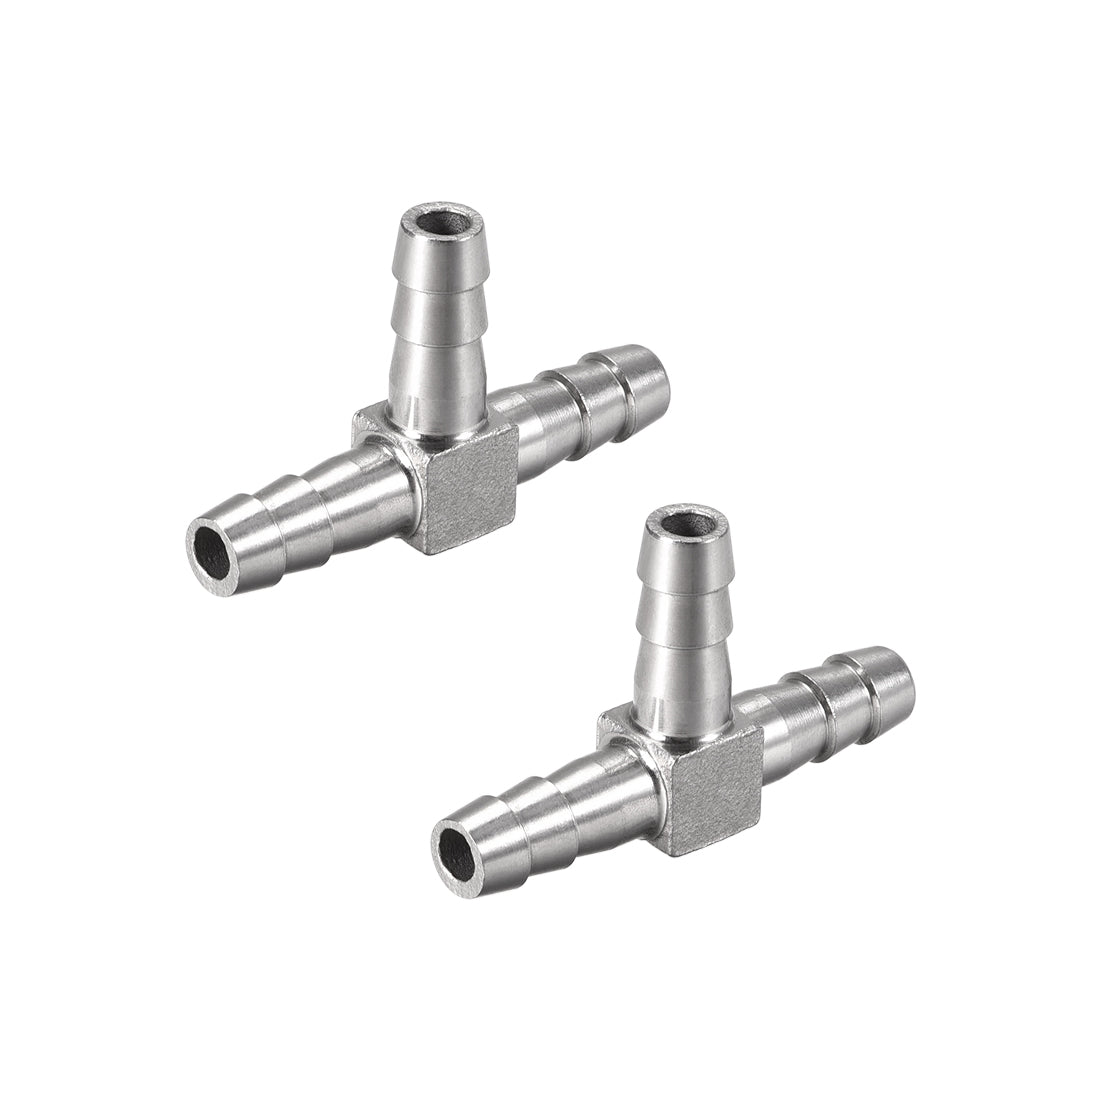 uxcell Uxcell 5/16-Inch (8mm) Hose ID Barb Fitting Stainless Steel 3 Way T-Shaped Union Home Brew Fitting 2pcs